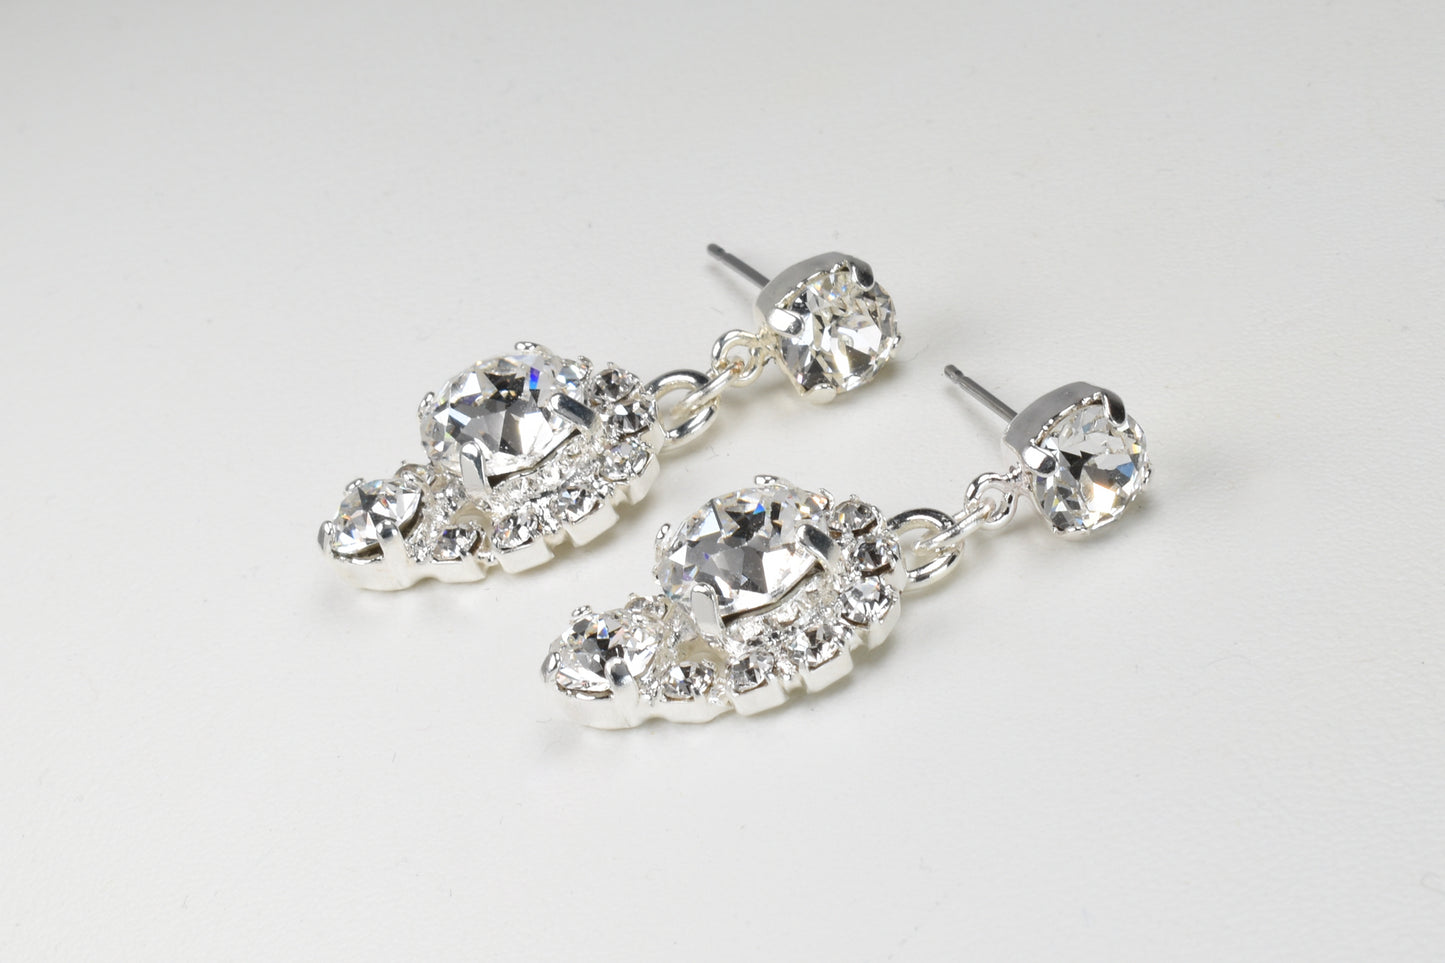 Ingrid - A sparkling silver and crystal stud earring.